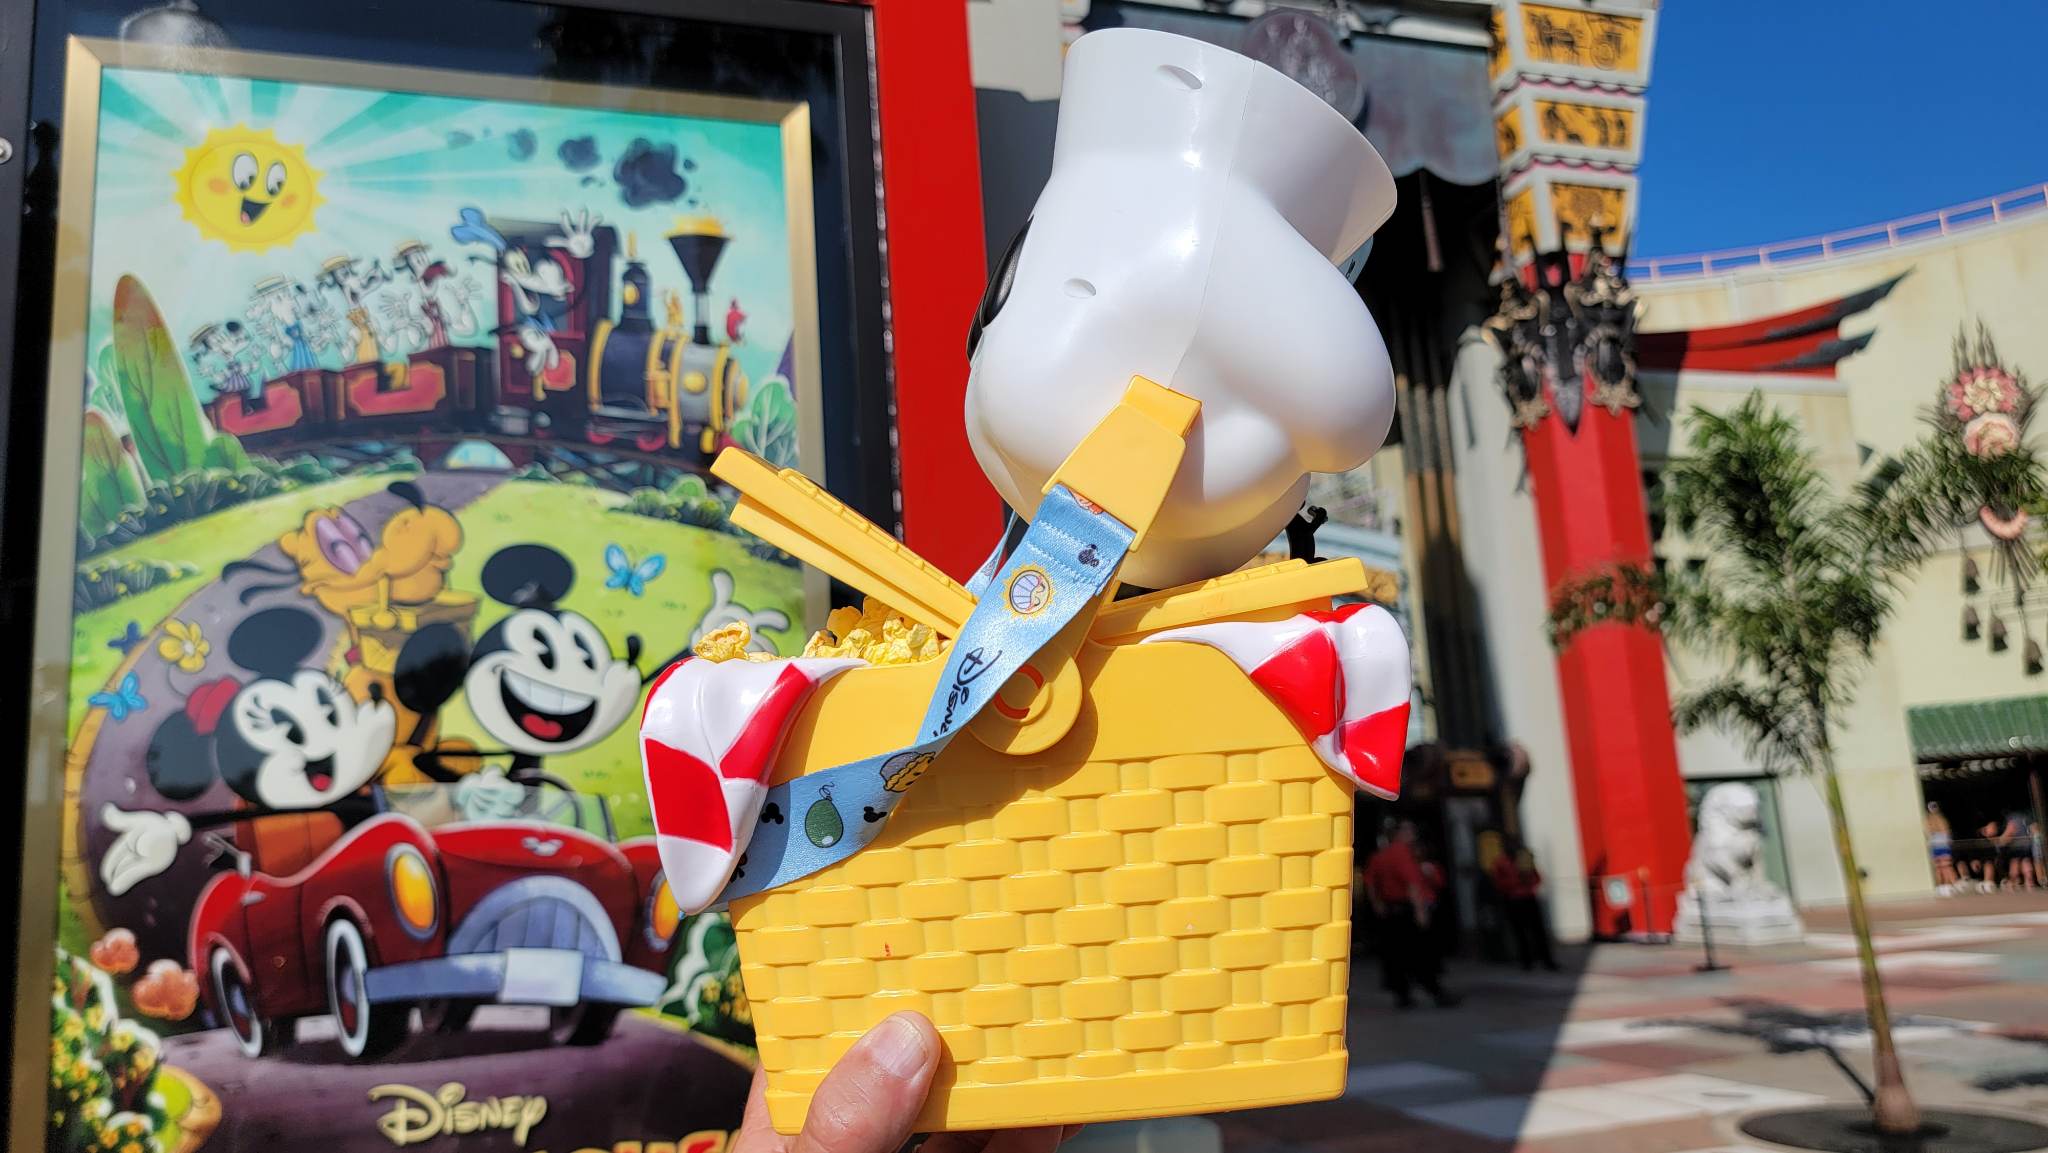 Perfect Picnic Popcorn Bucket is Now Available at Hollywood Studios